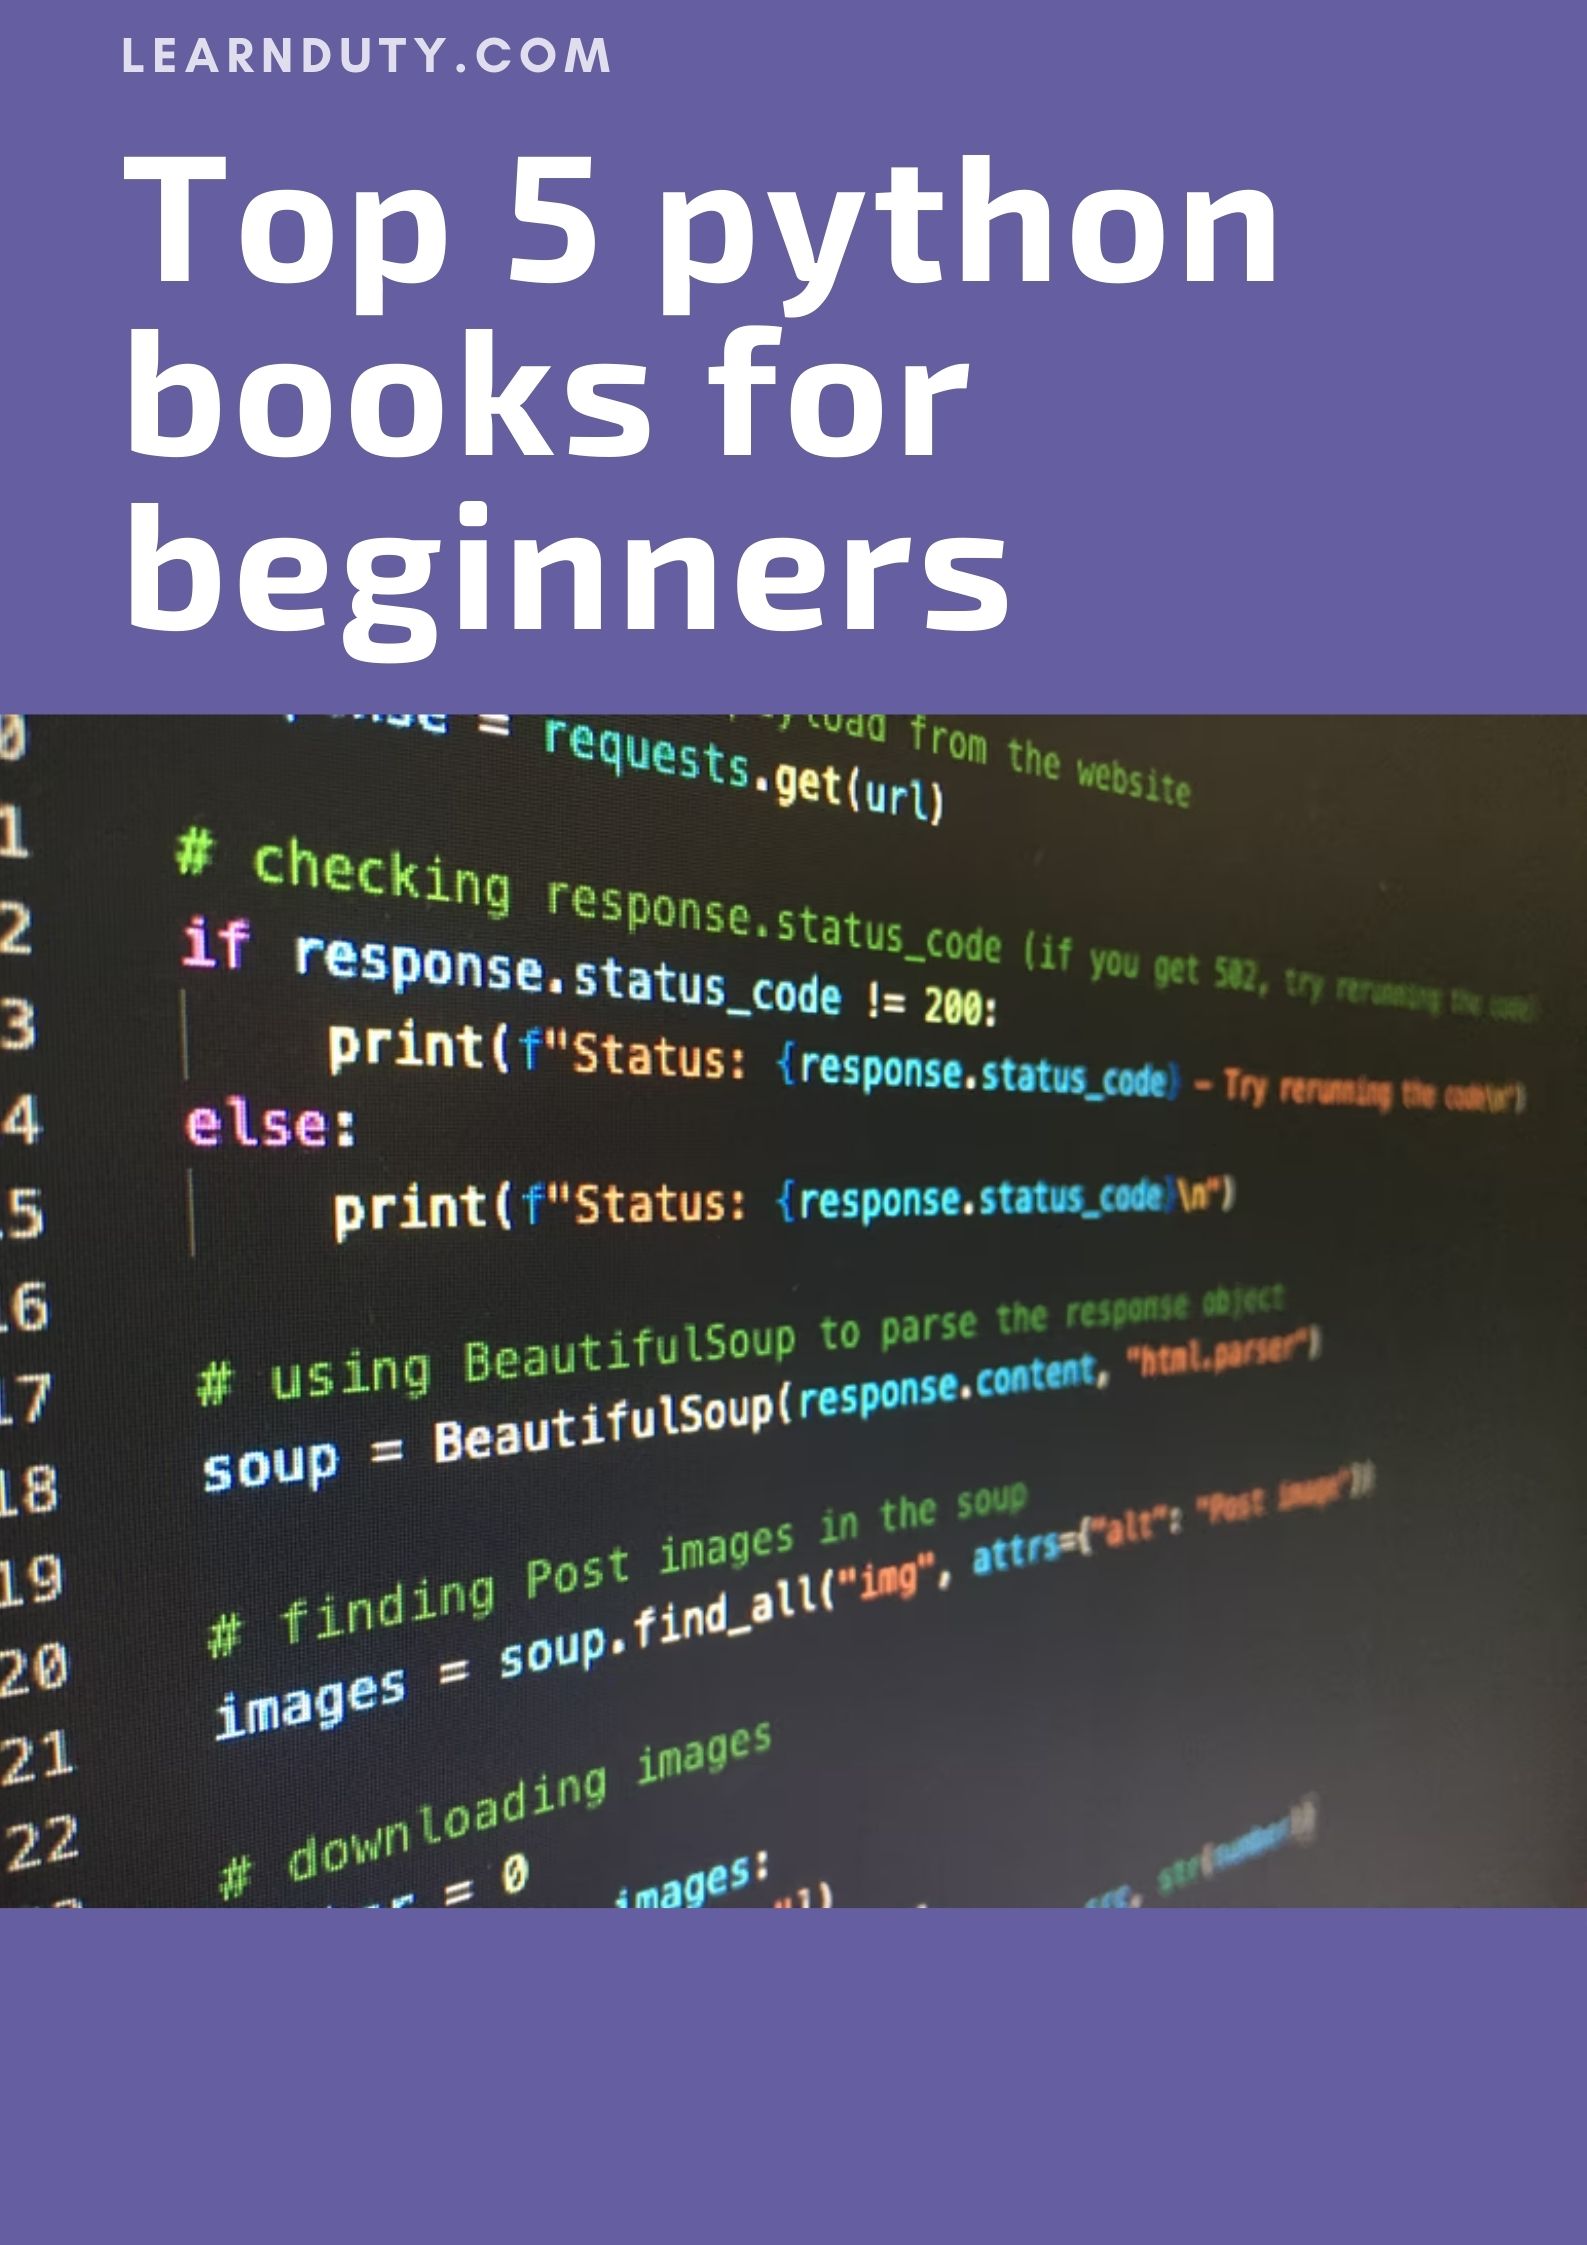 Top 5 python books for beginners